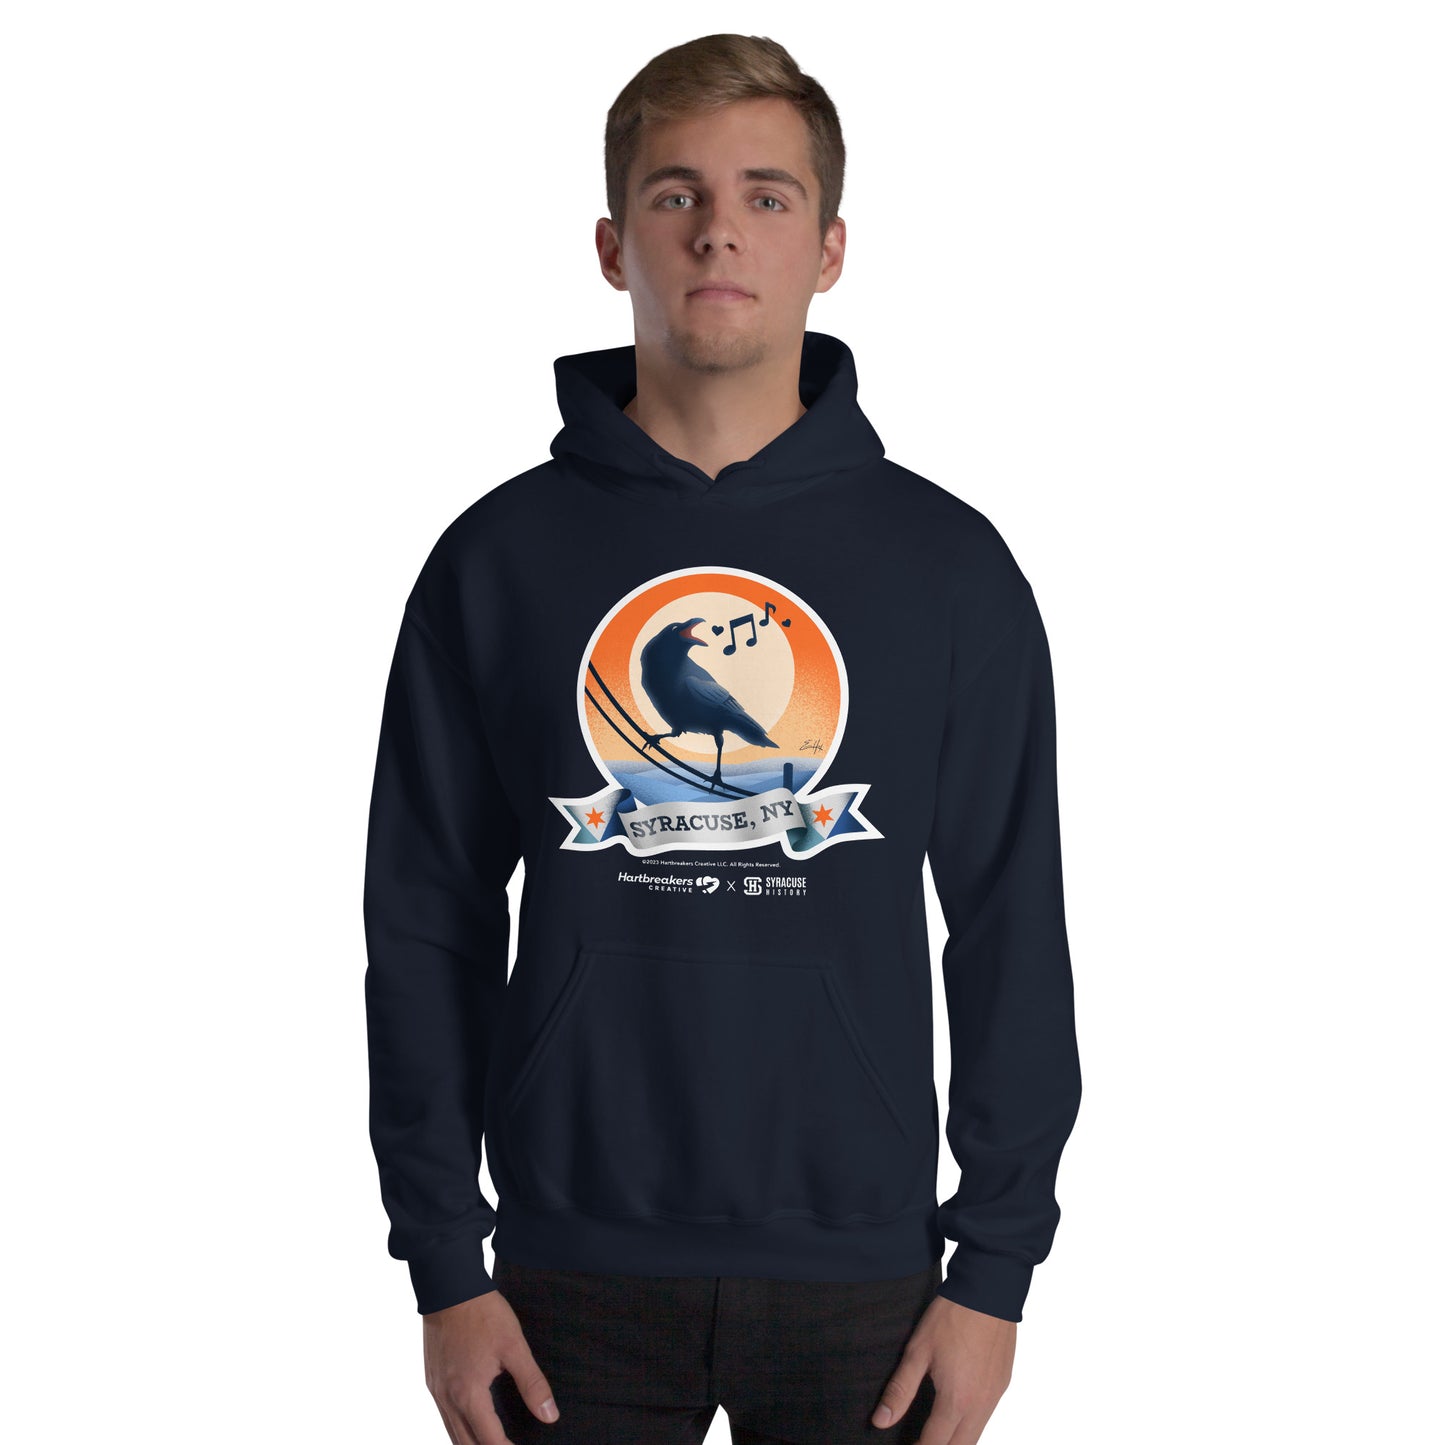 A man wearing a navy hoodie featuring an illustration of a crow on a telephone wire and a banner beneath it that says Syracuse, NY